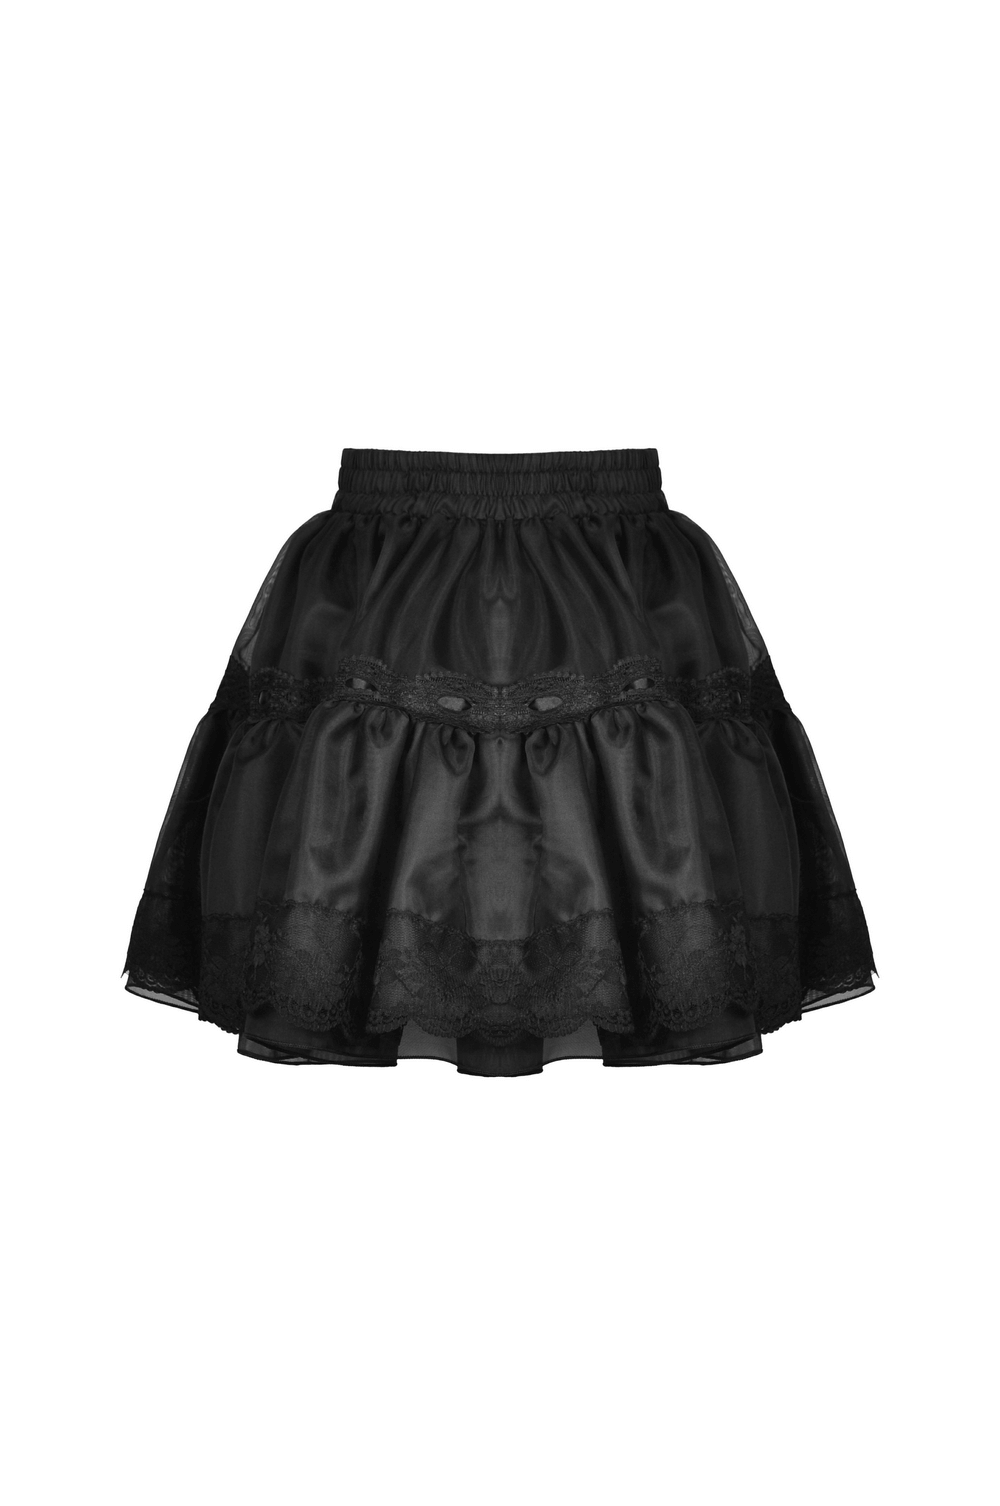 Elegant Black Lace Skirt with Bow Details for Evening Wear